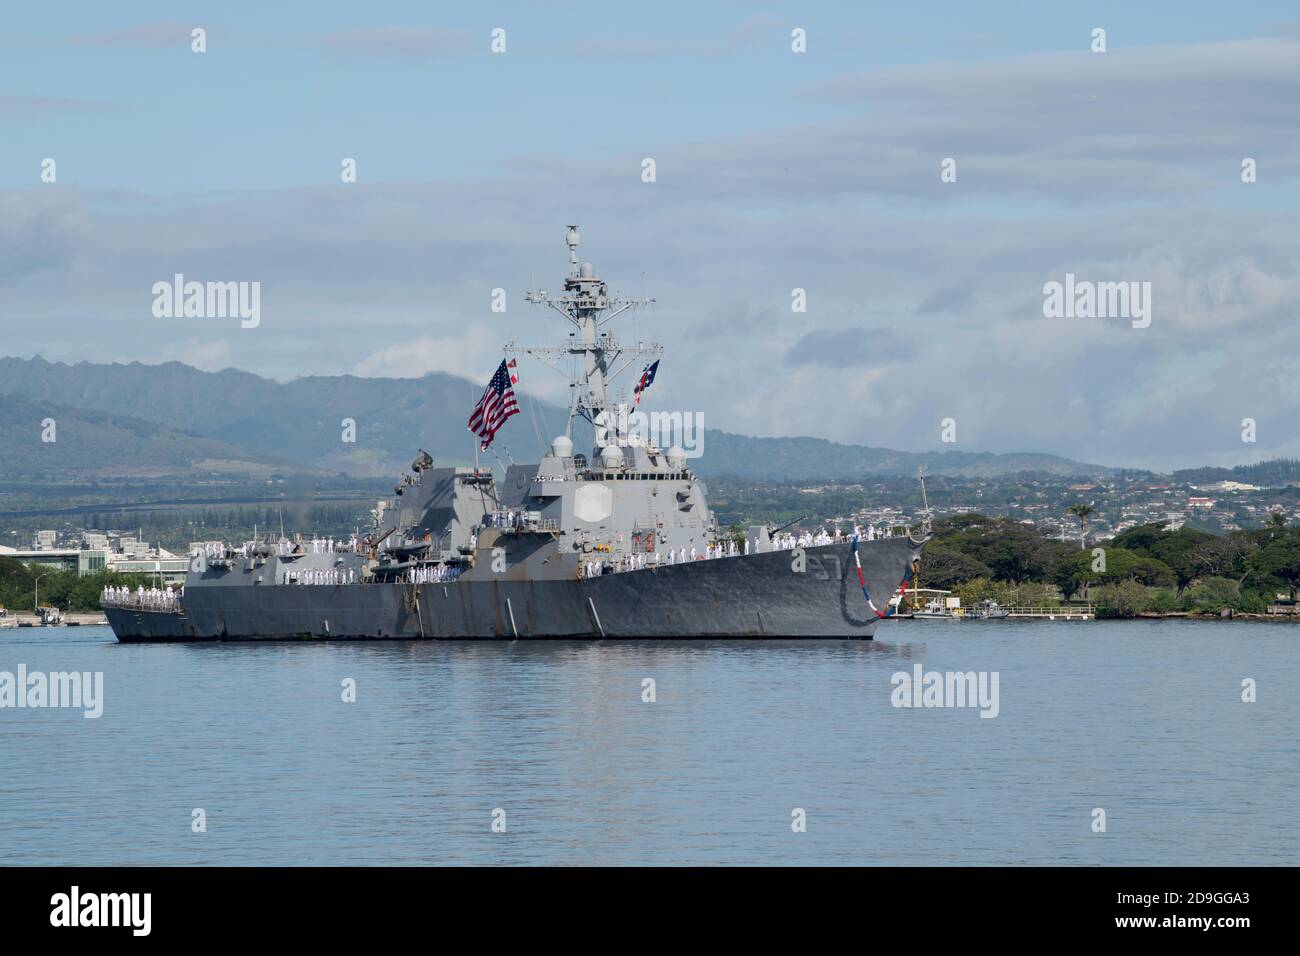 The U.S. Navy Arleigh Burke class guided-missile destroyer USS Halsey returns to homeport at Joint Base Pearl Harbor-Hickam following a seven-month deployment October 29, 2020 in Pearl Harbor, Hawaii. Stock Photo